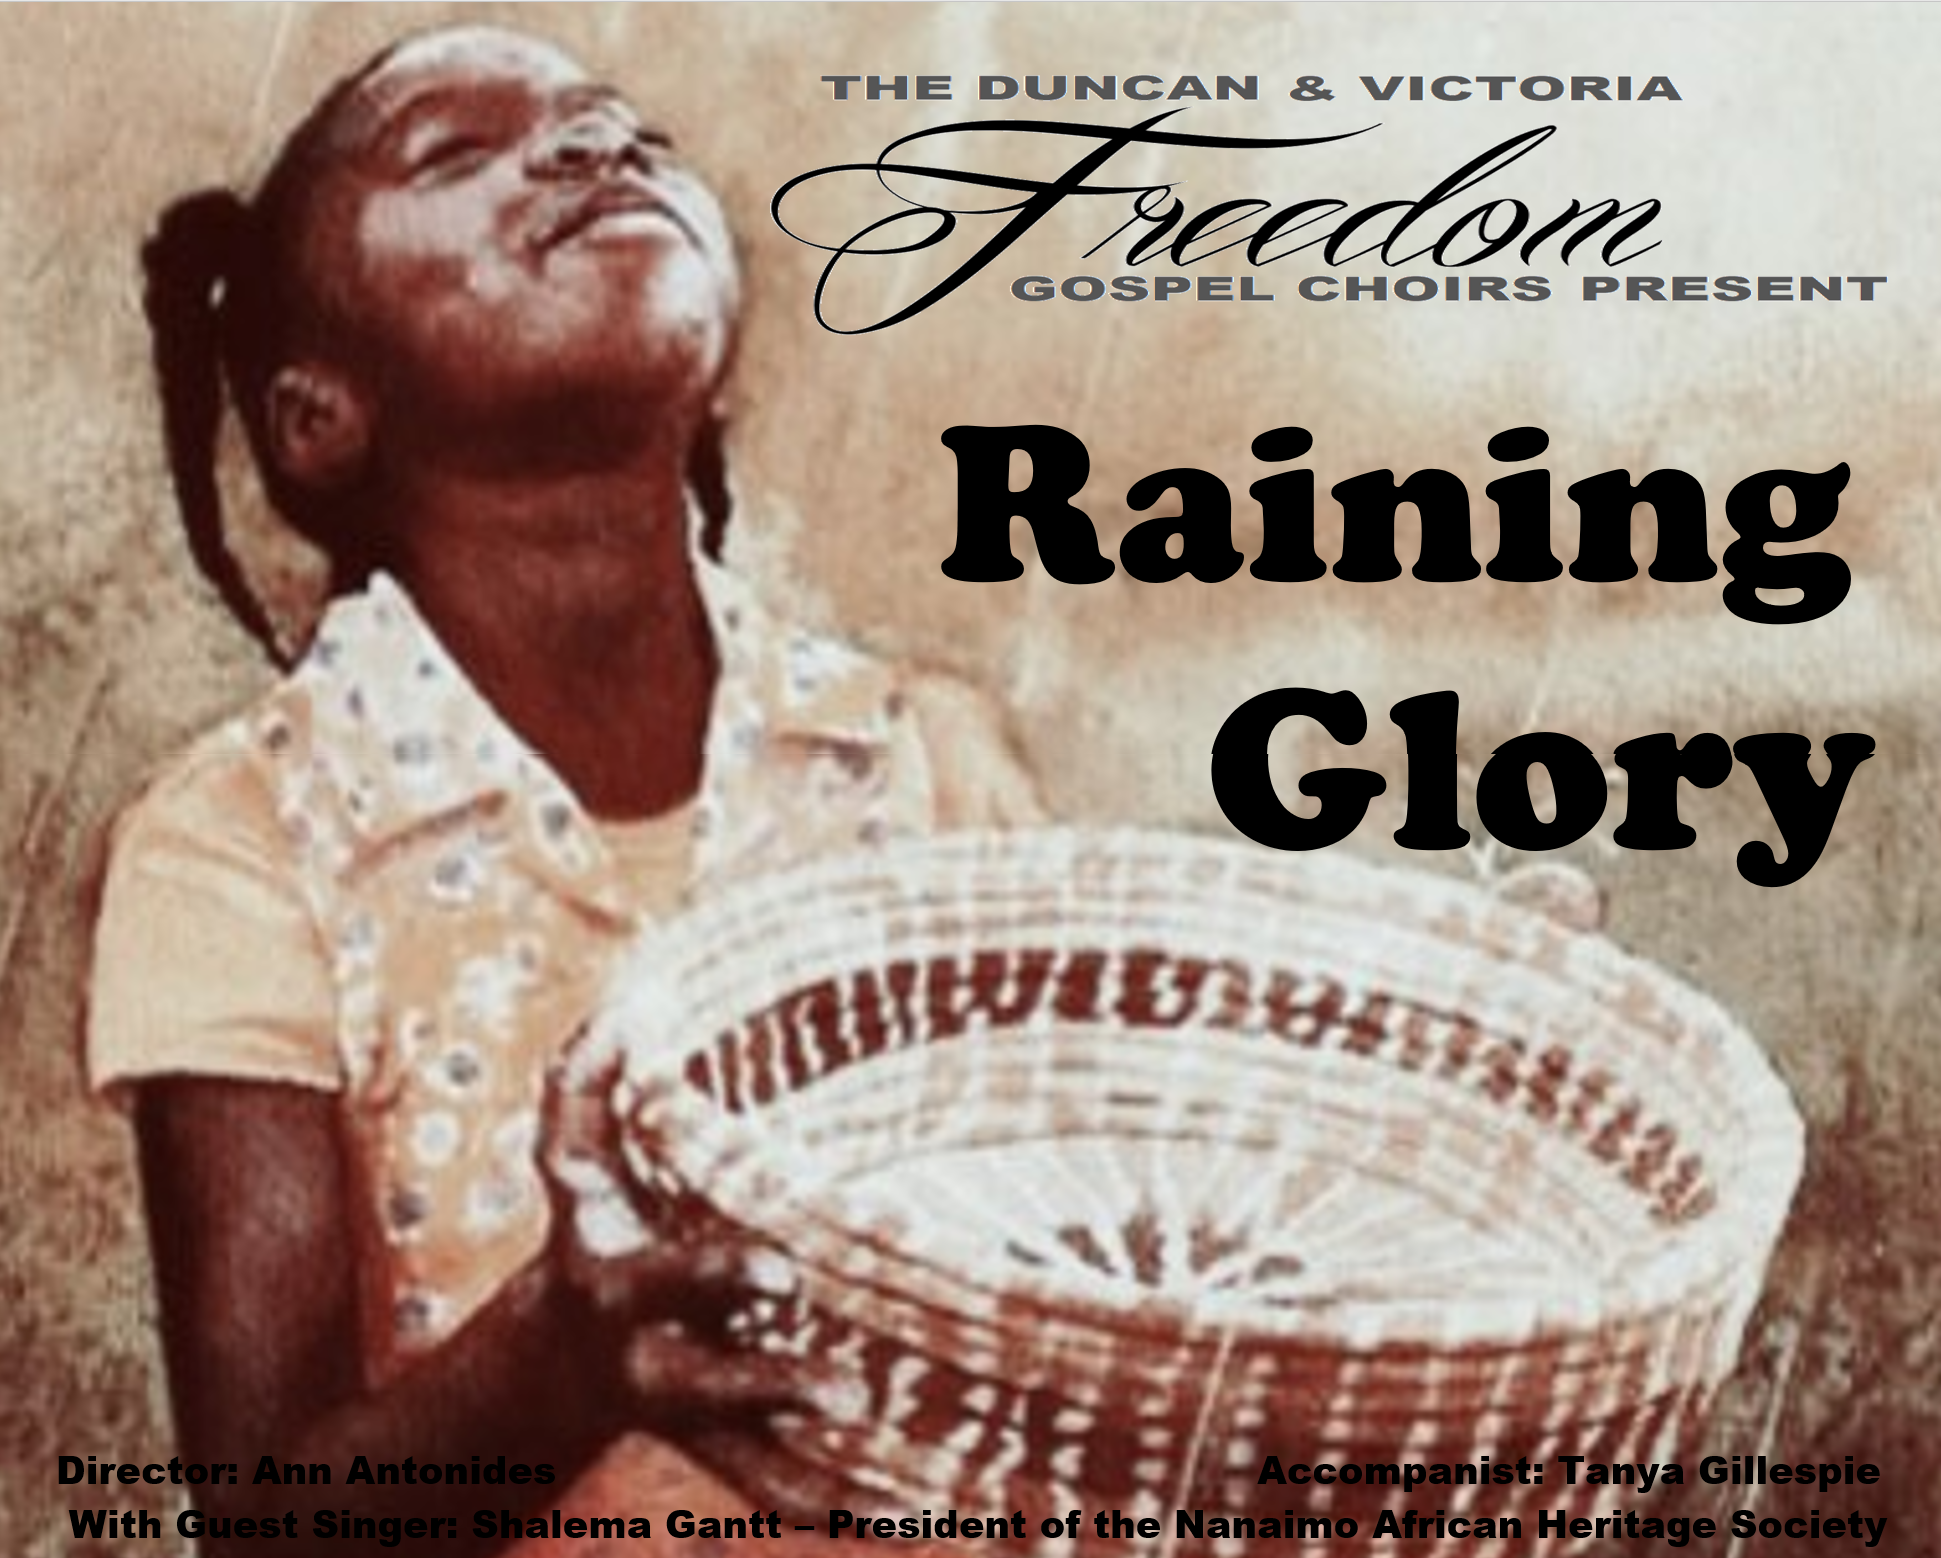 ‘Raining Glory’ Concerts in Duncan & Victoria!